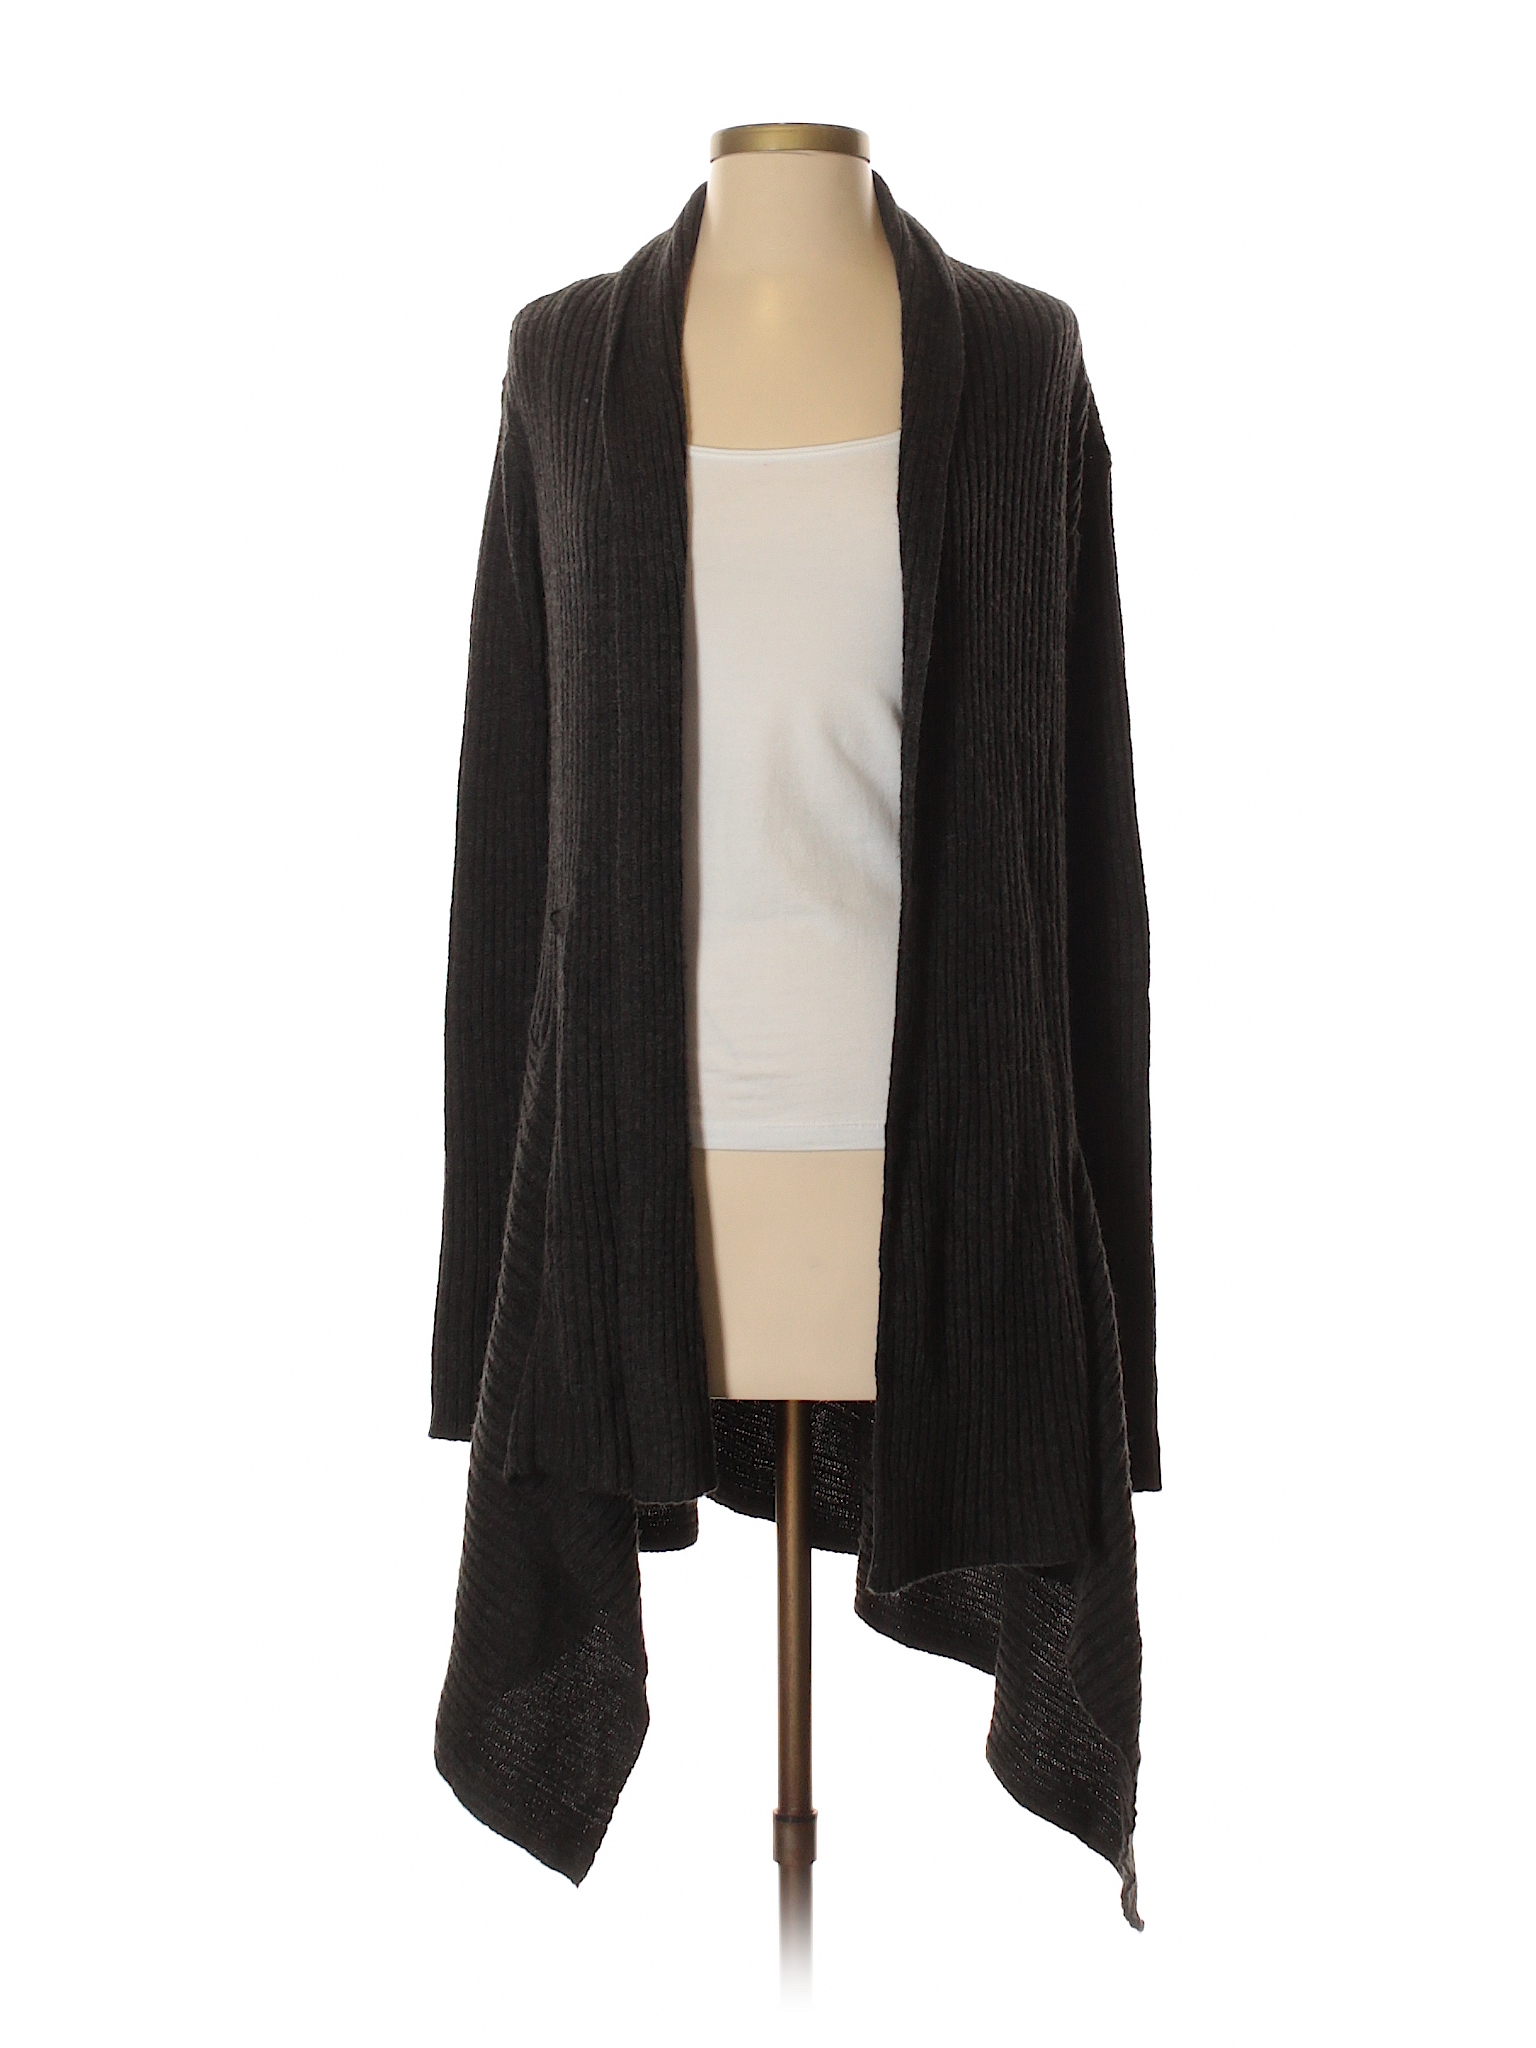 Ambiance Apparel 100% Acrylic Solid Gray Cardigan Size S - 68% off ...